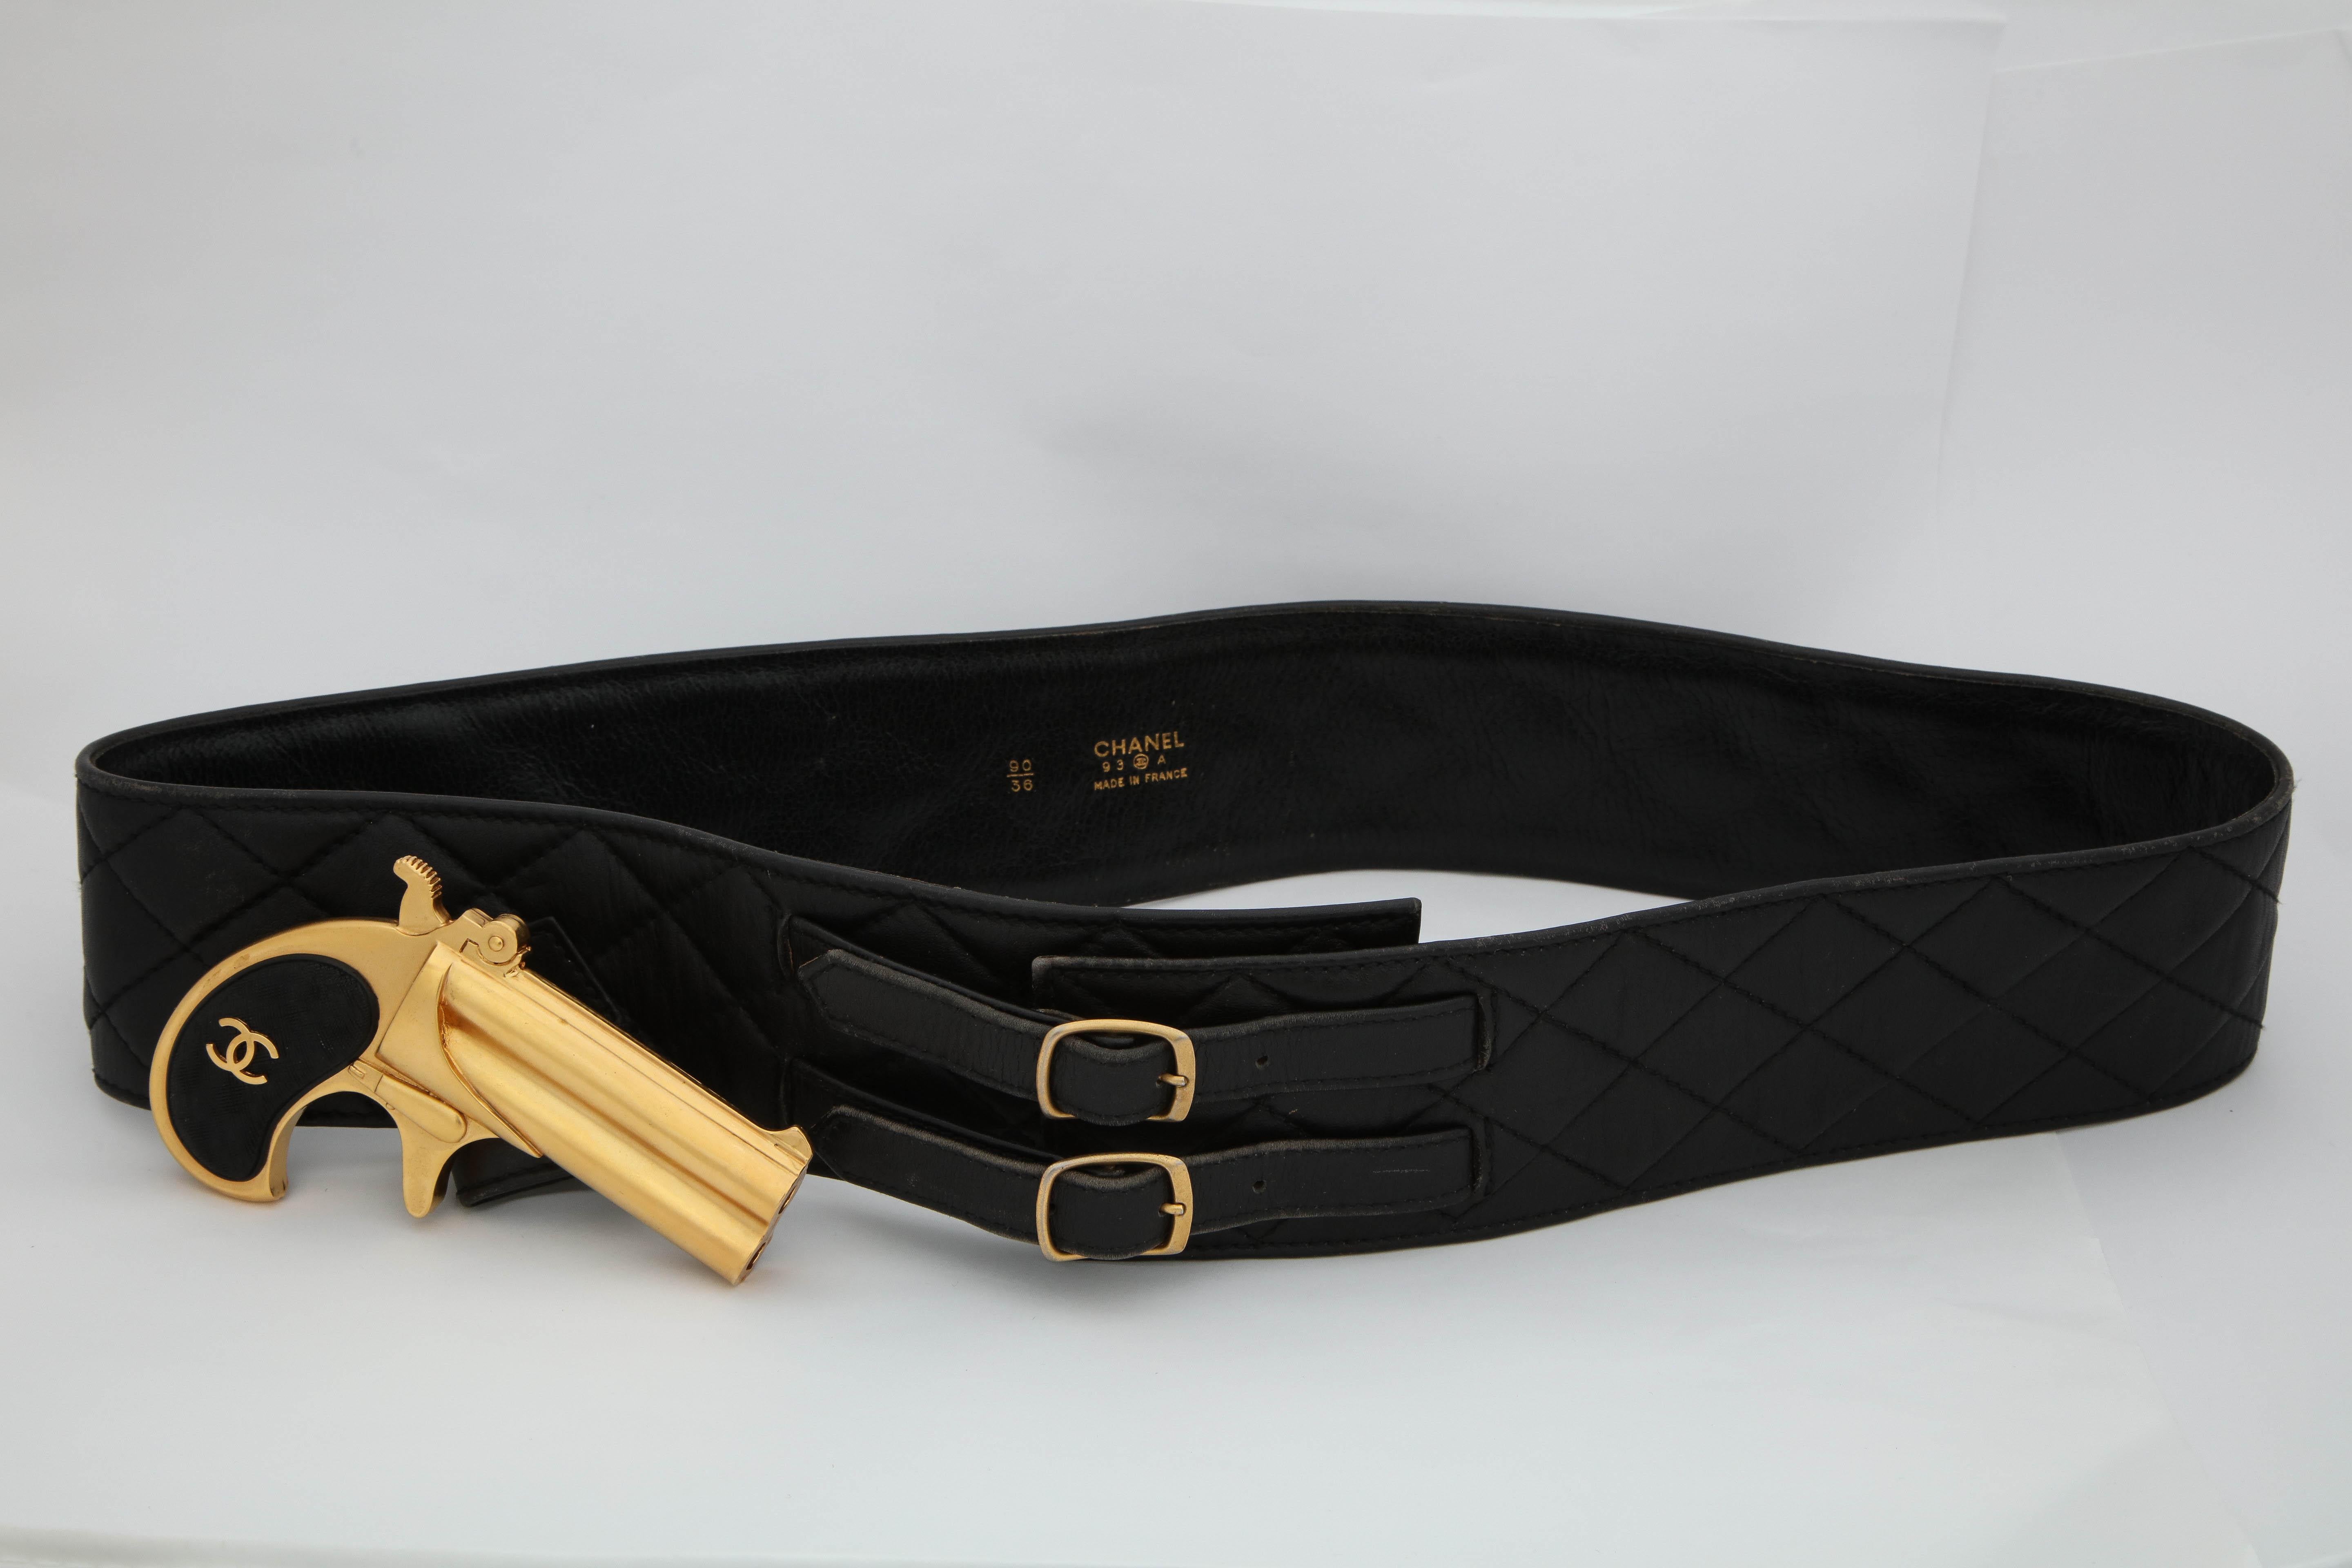 Rare Vintage Chanel Gun Motif Leather Belt In Good Condition For Sale In Chicago, IL